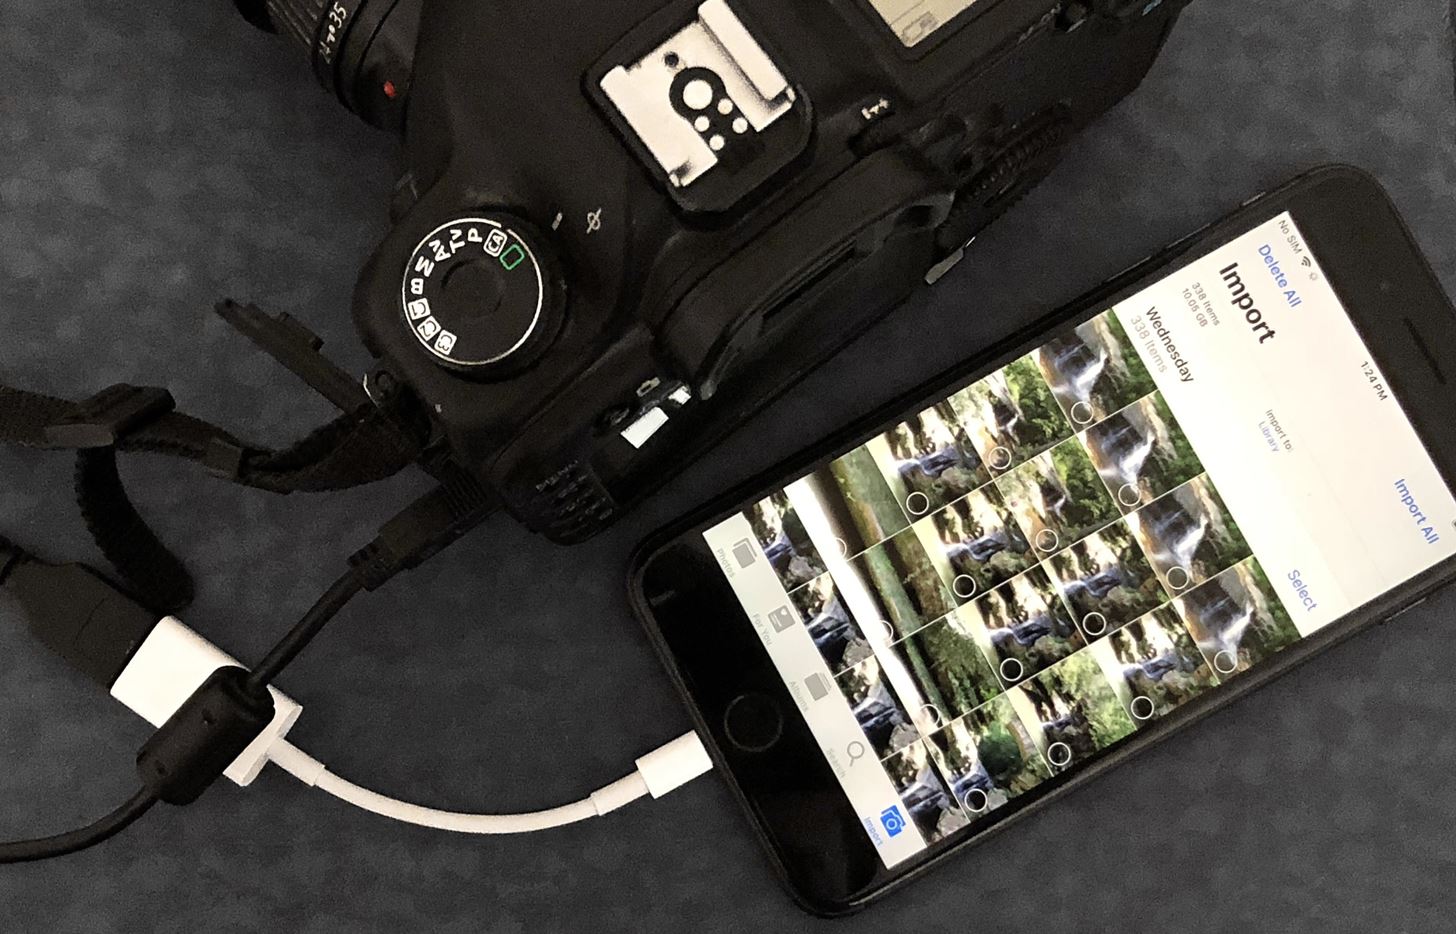 How To Transfer Photos From Your Camera To Your IPhone